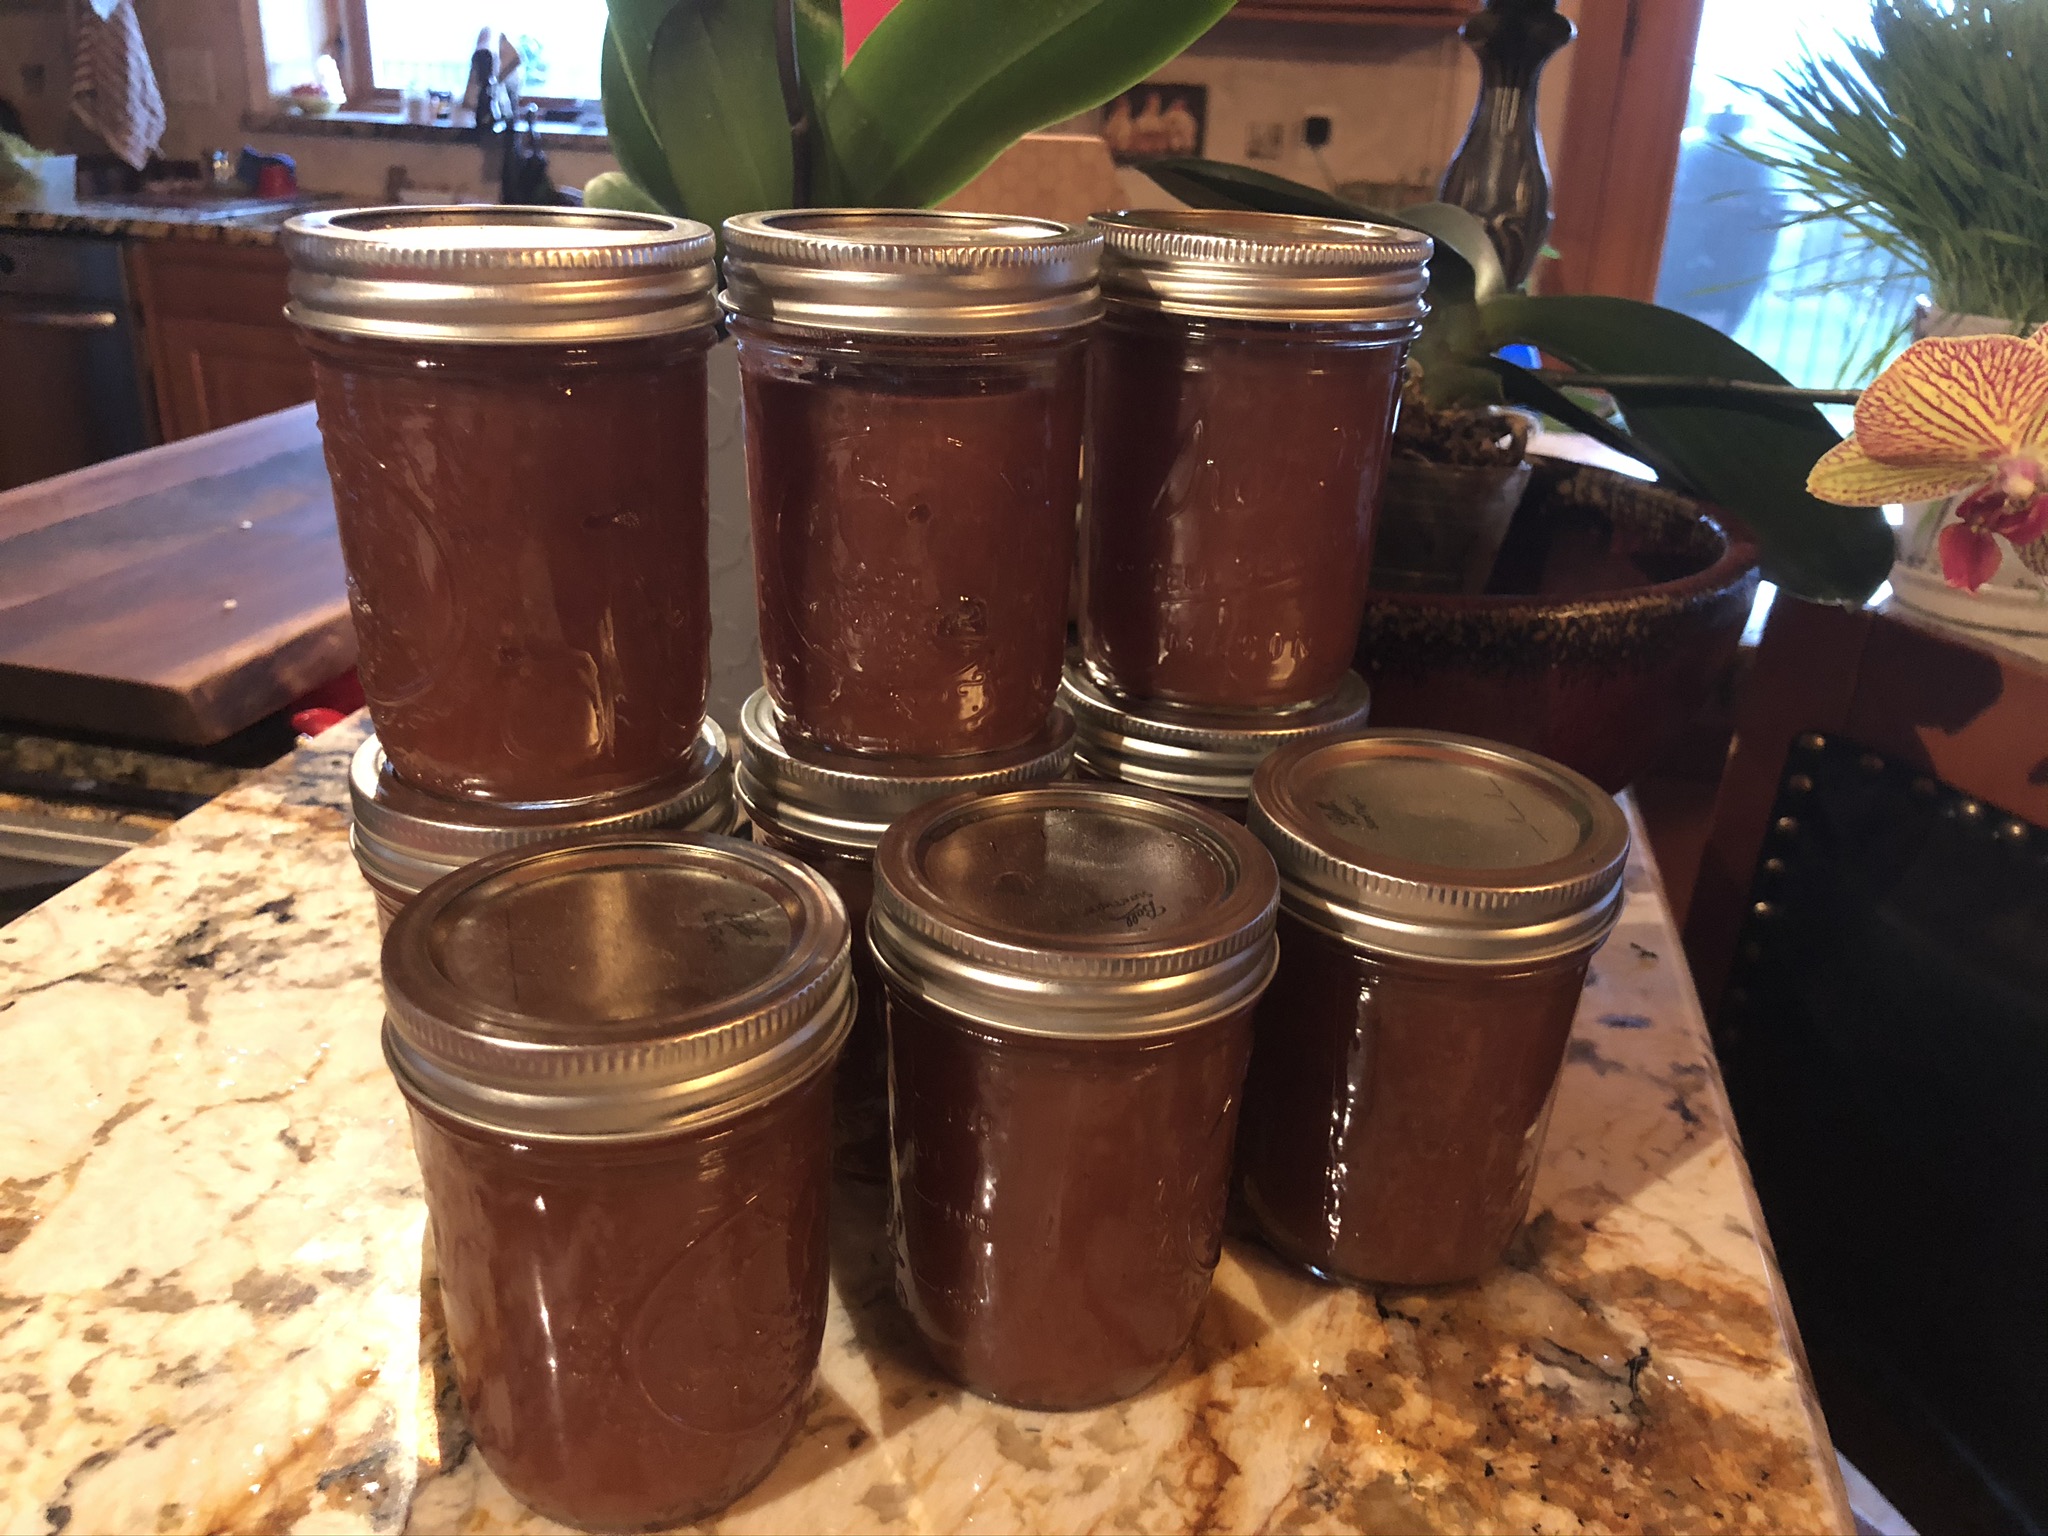 What to do with those old apples – APPLE BUTTER